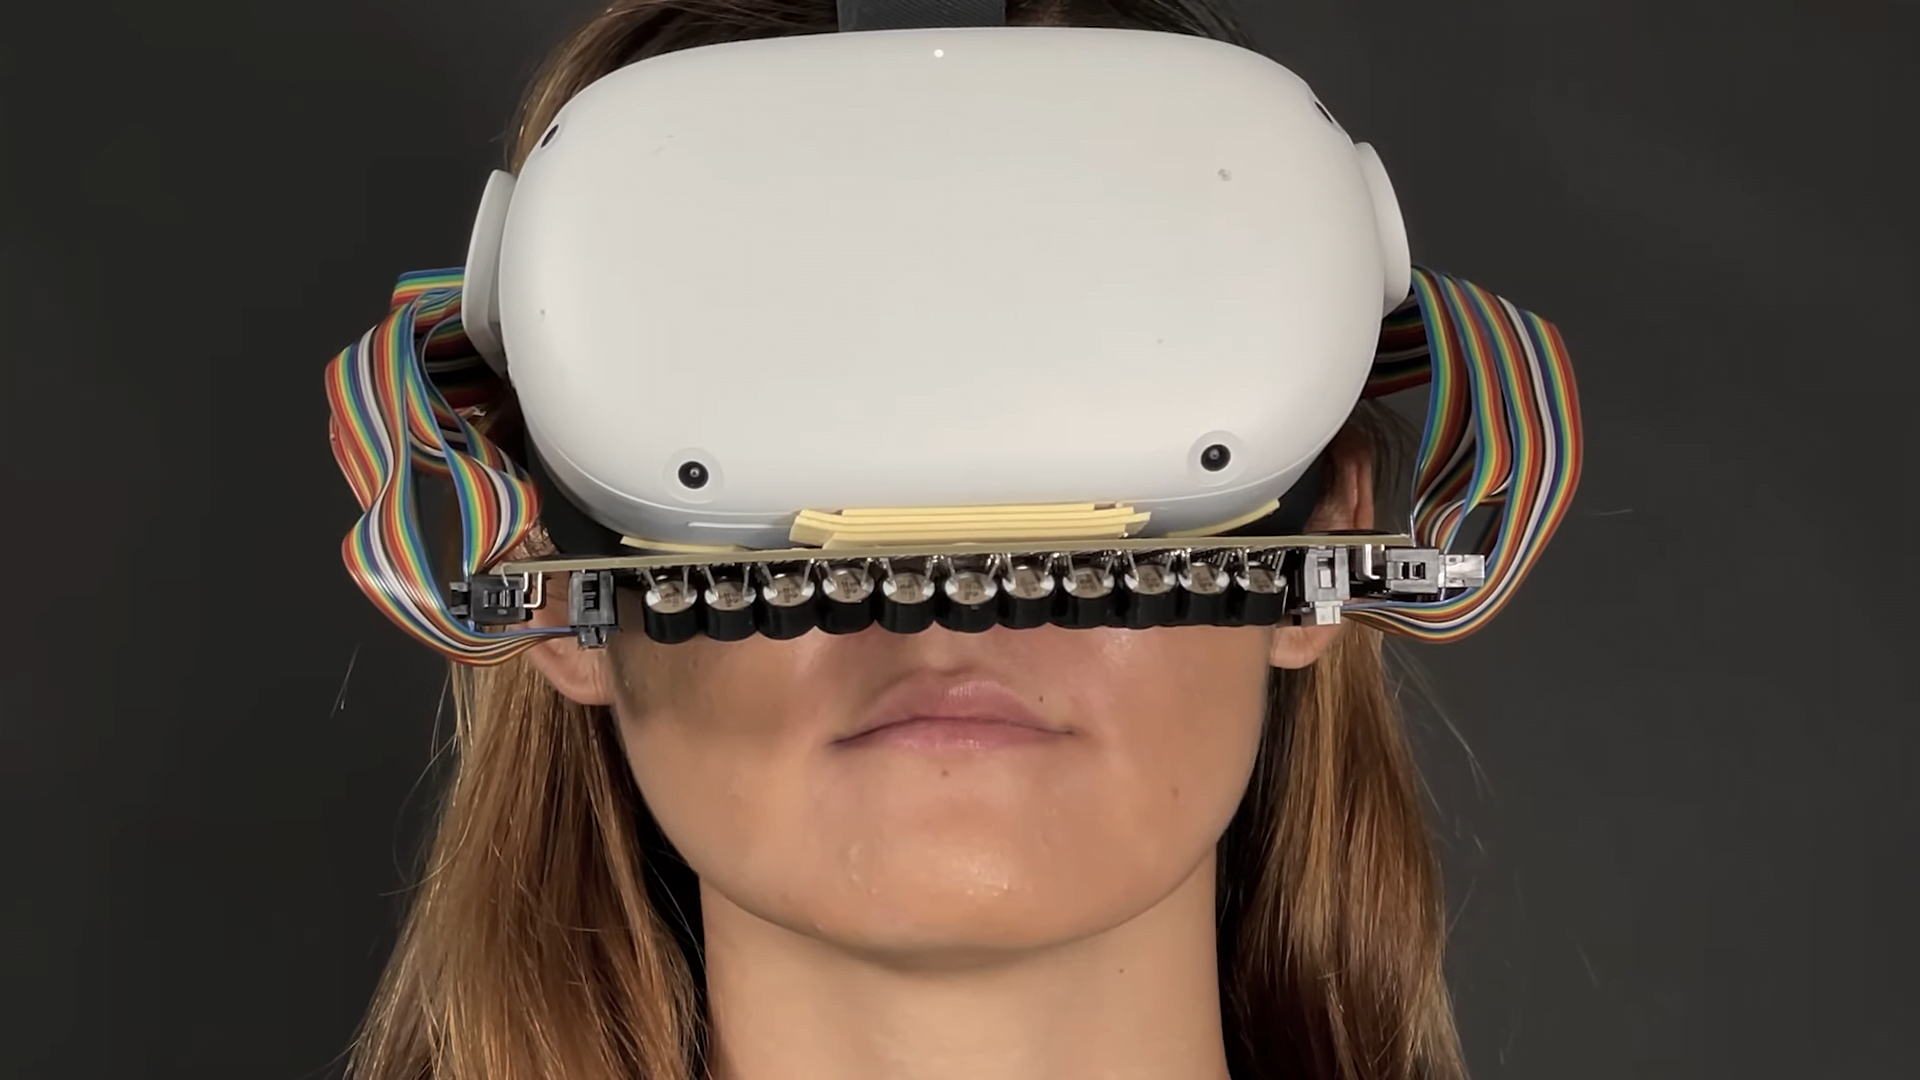 Researchers demonstrate haptic VR accessory for mouth sensations